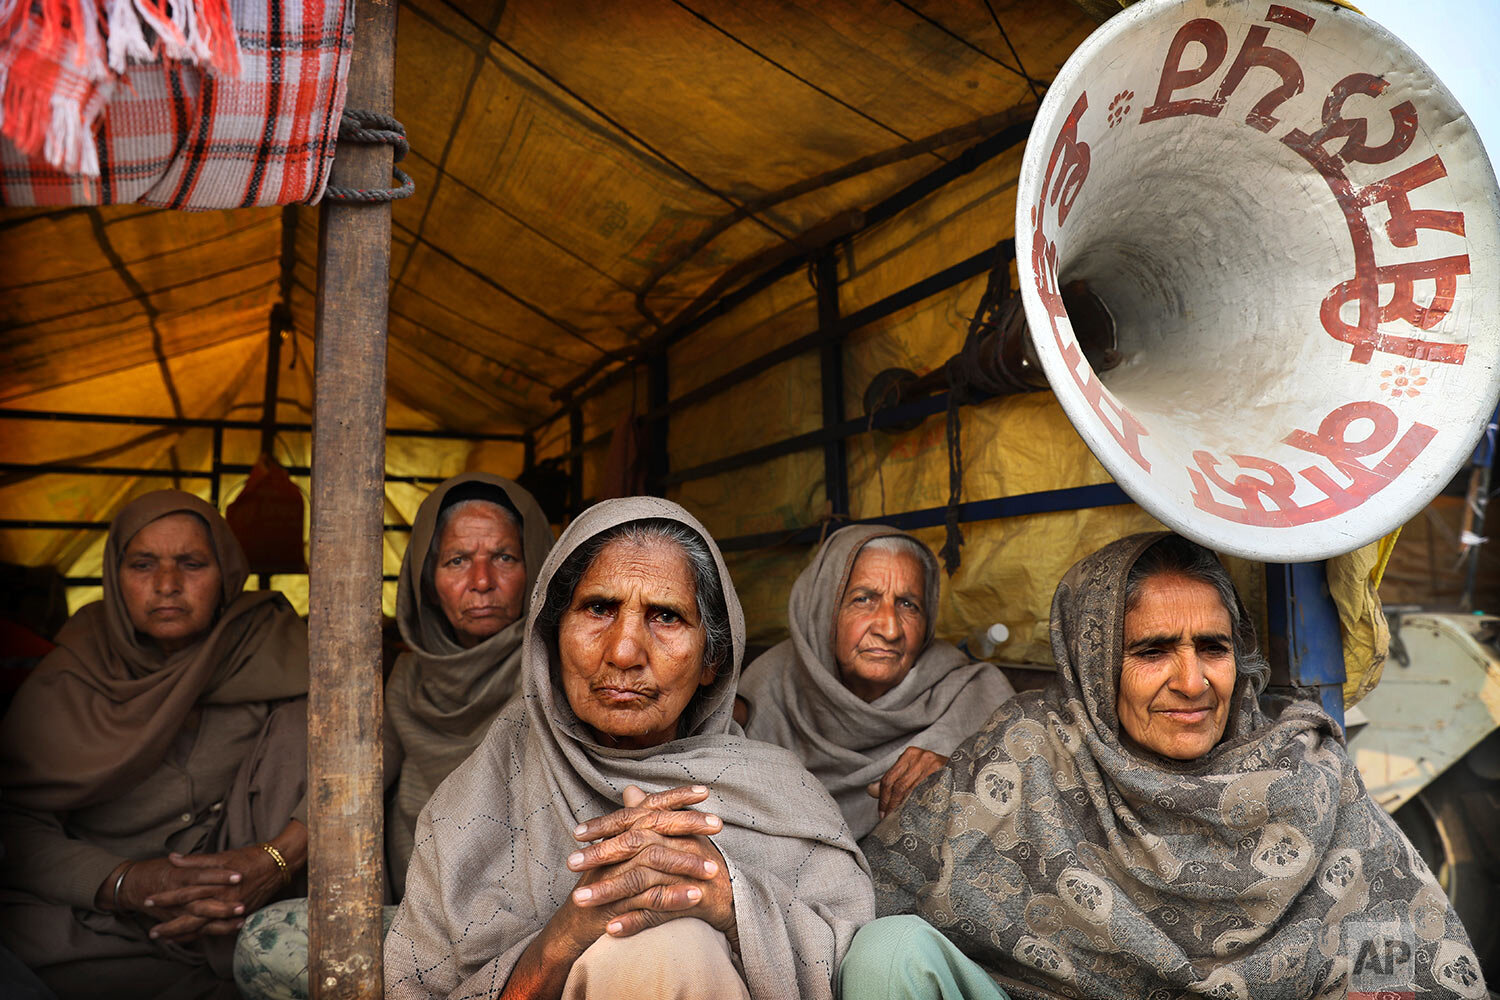  Elderly women farmers sit at the back of a trailer as they participate in a protest against new farm laws at the Delhi-Haryana state border, on the outskirts of New Delhi, India, Sunday, Dec. 27, 2020. (AP Photo/Manish Swarup) 